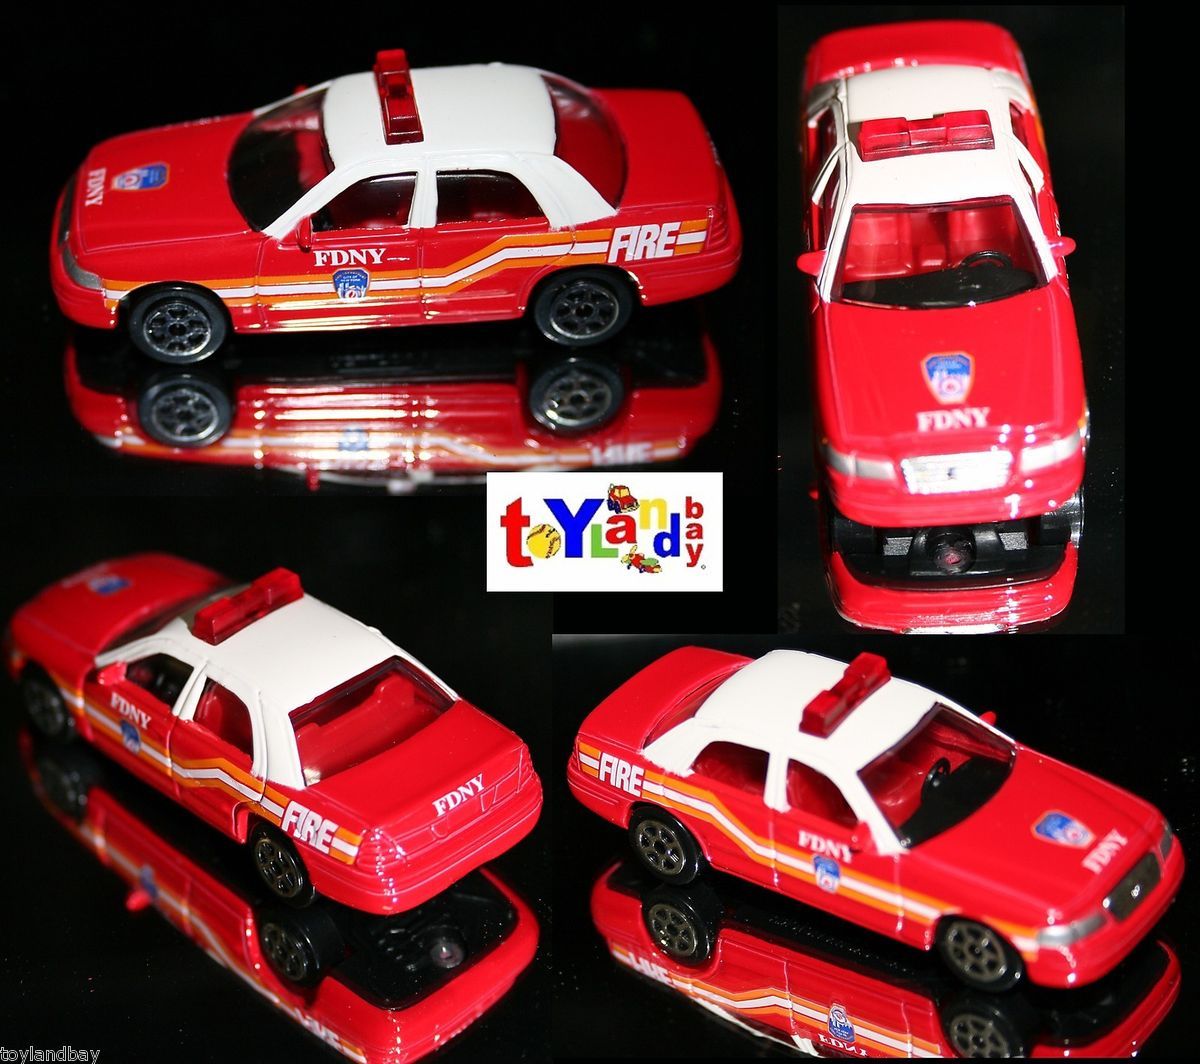 FDNY New York City Fire Chief Car Ford Crown Victoria 1 64 scale